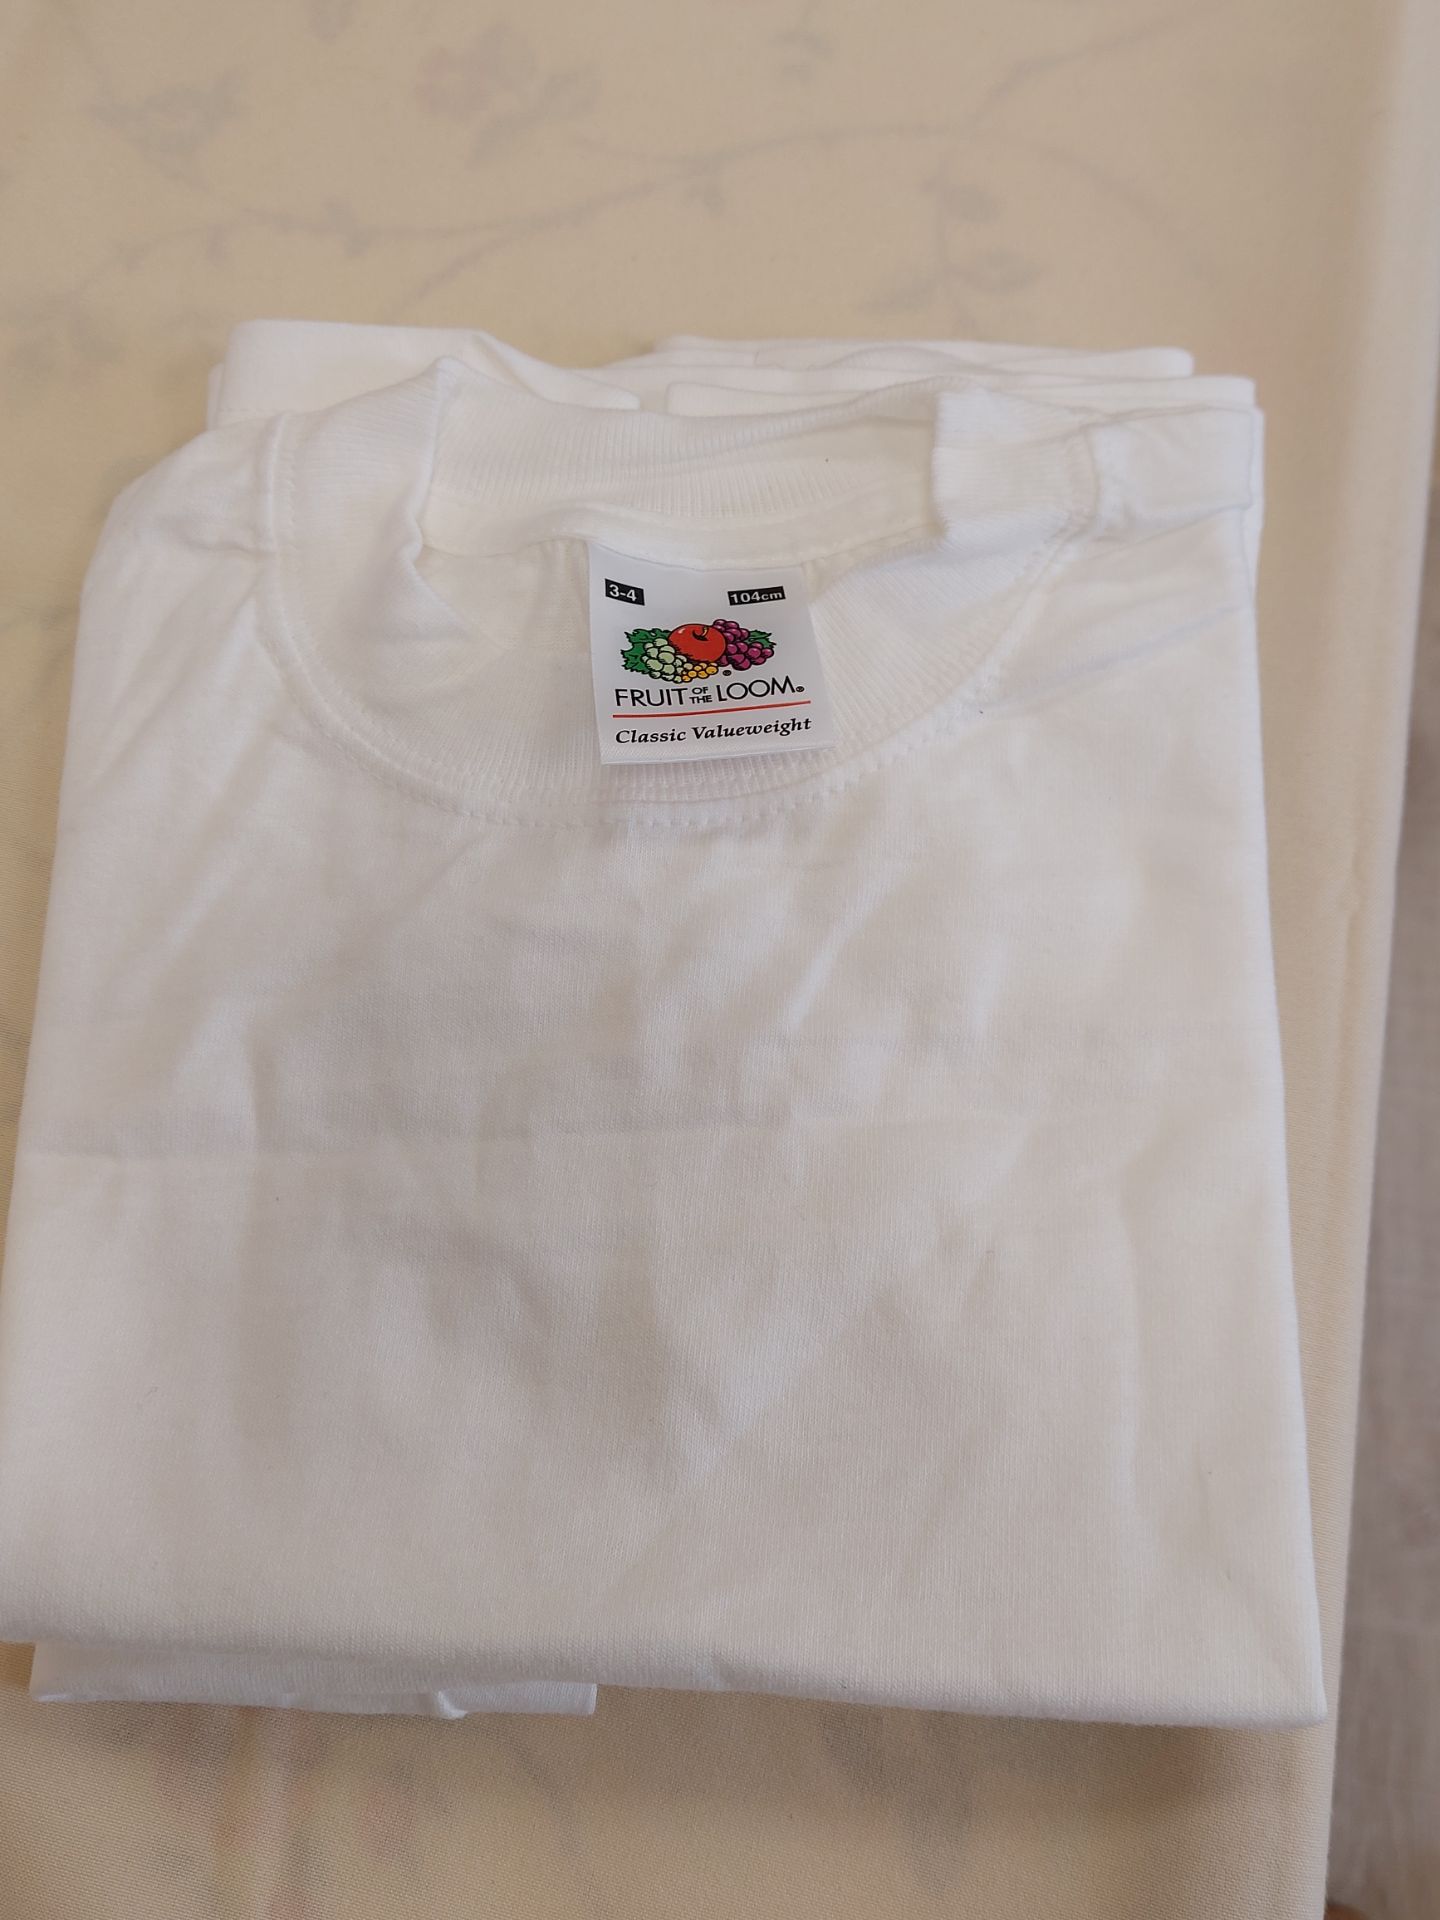 White Teeshirts Age 3 To 4. Pack of 10 - Image 2 of 2